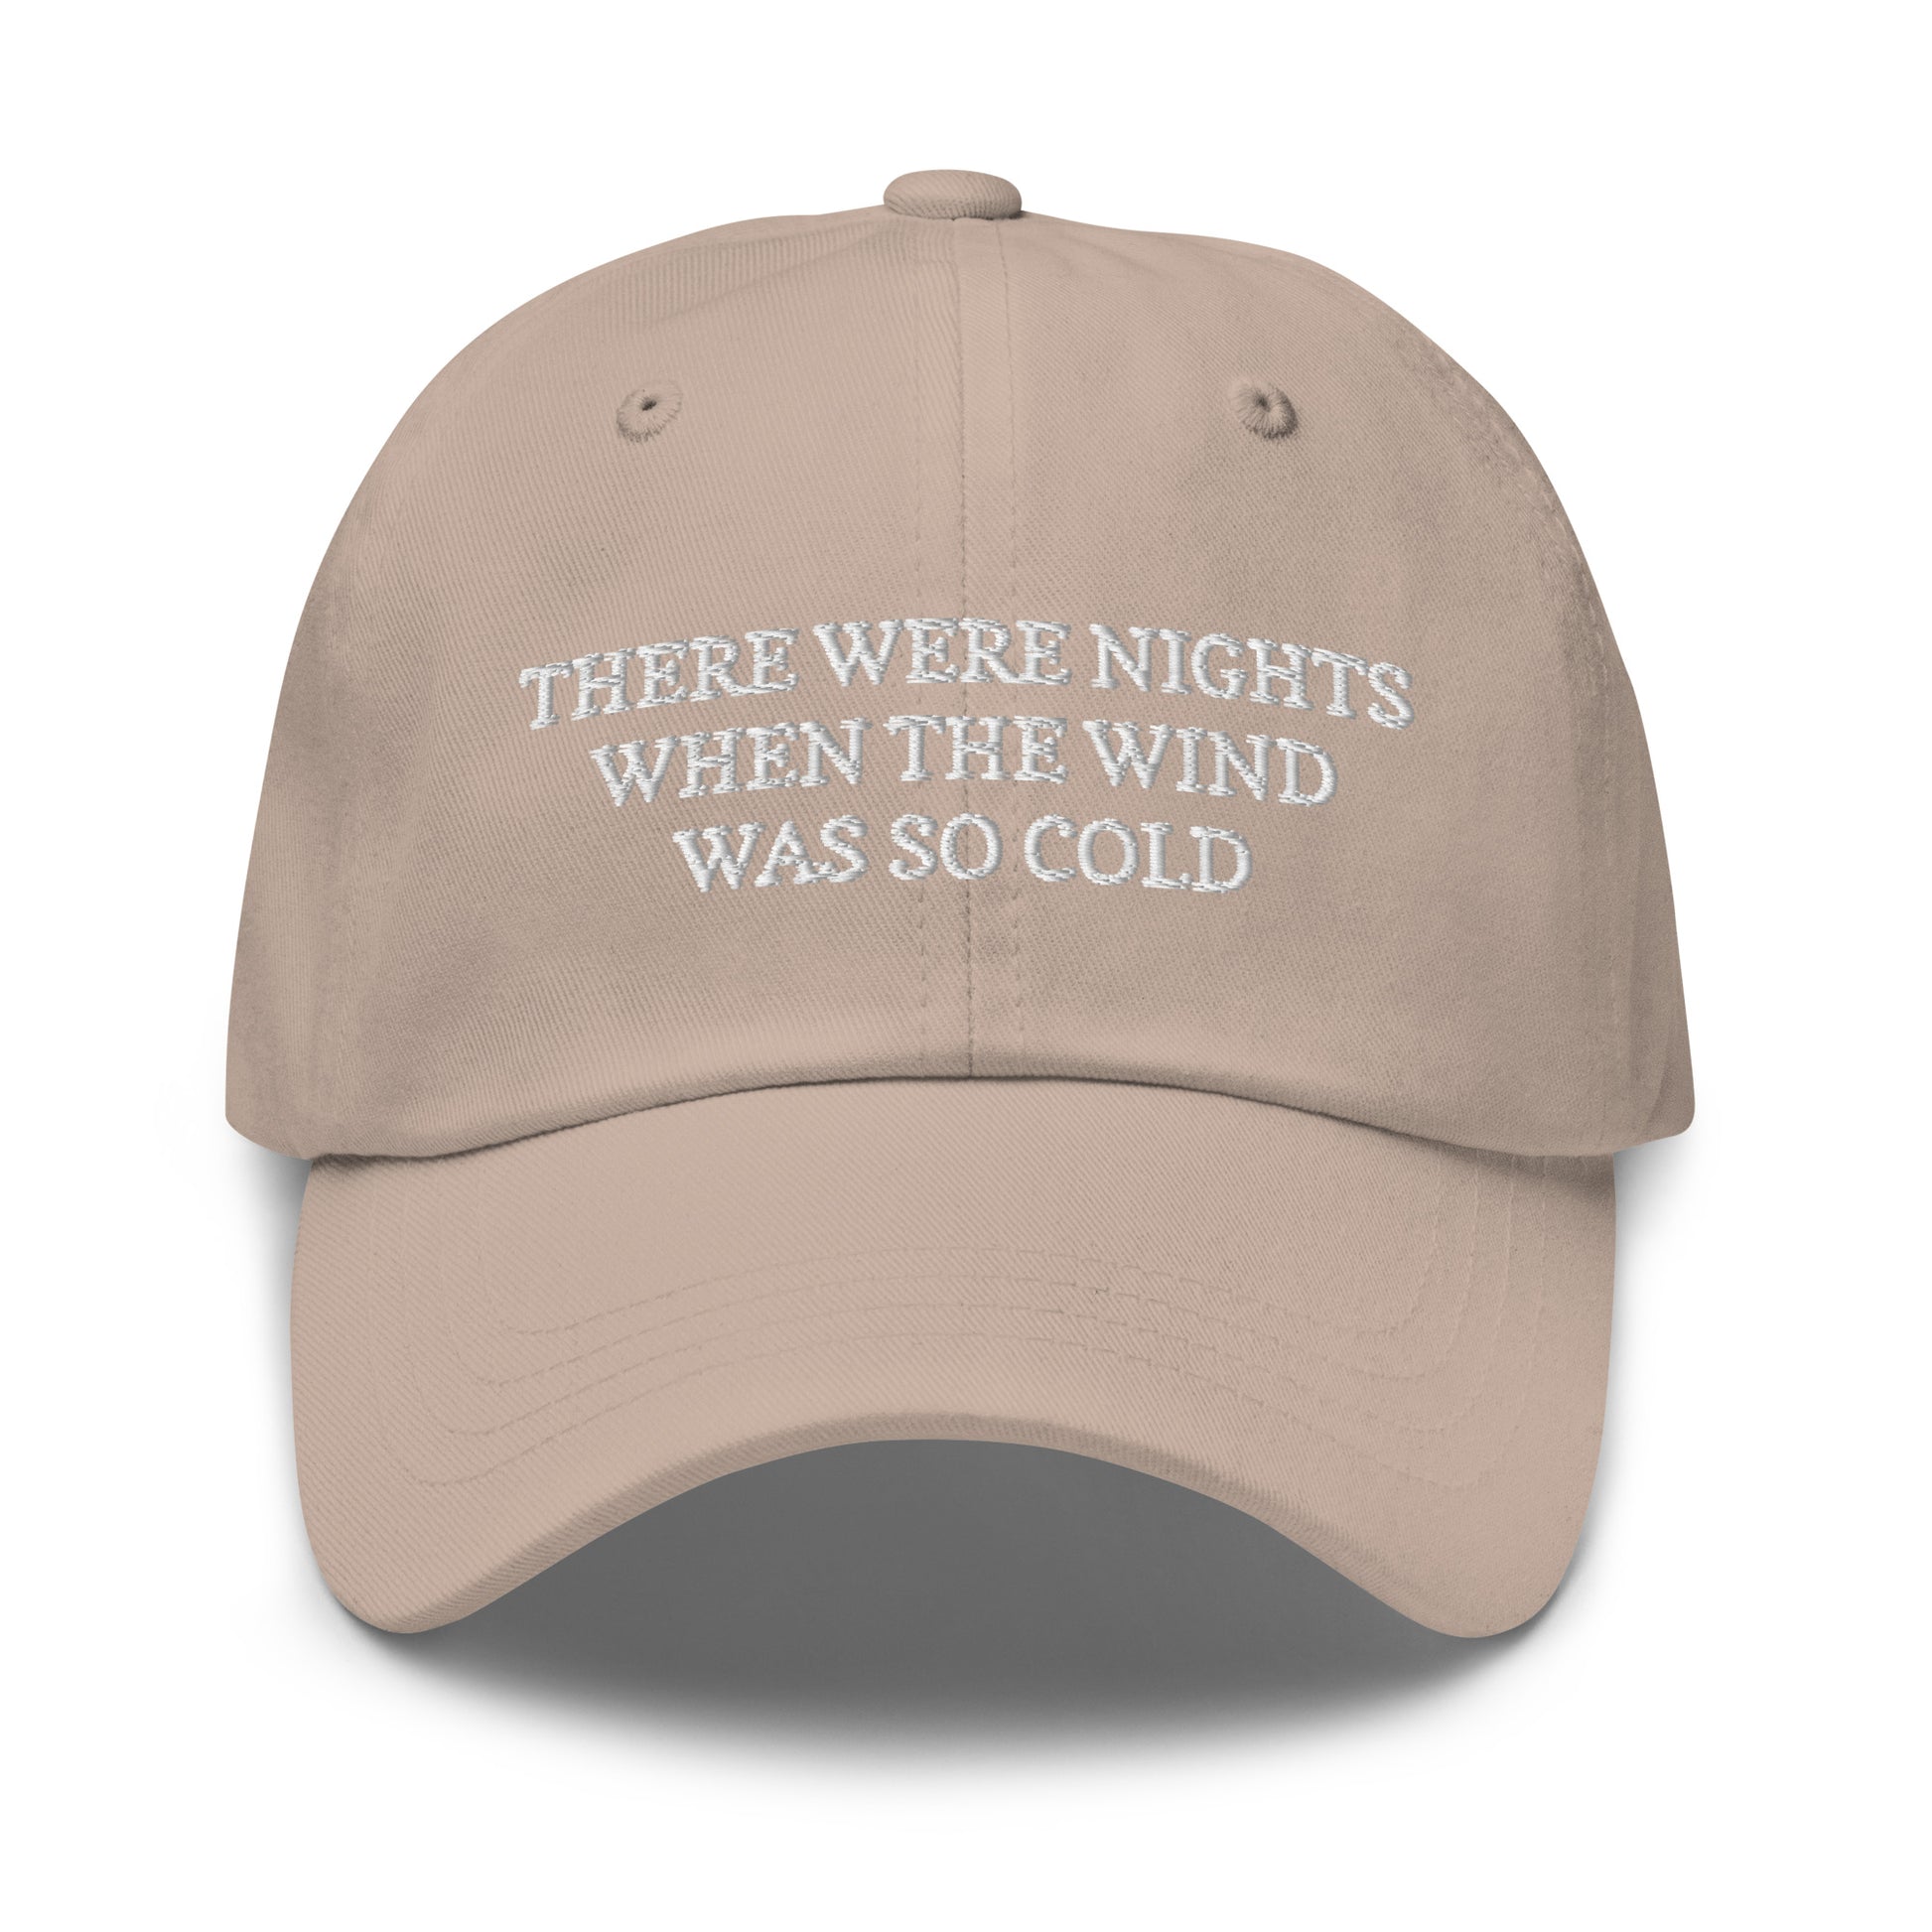 There Were Nights When The Wind Was So Cold Dad hat